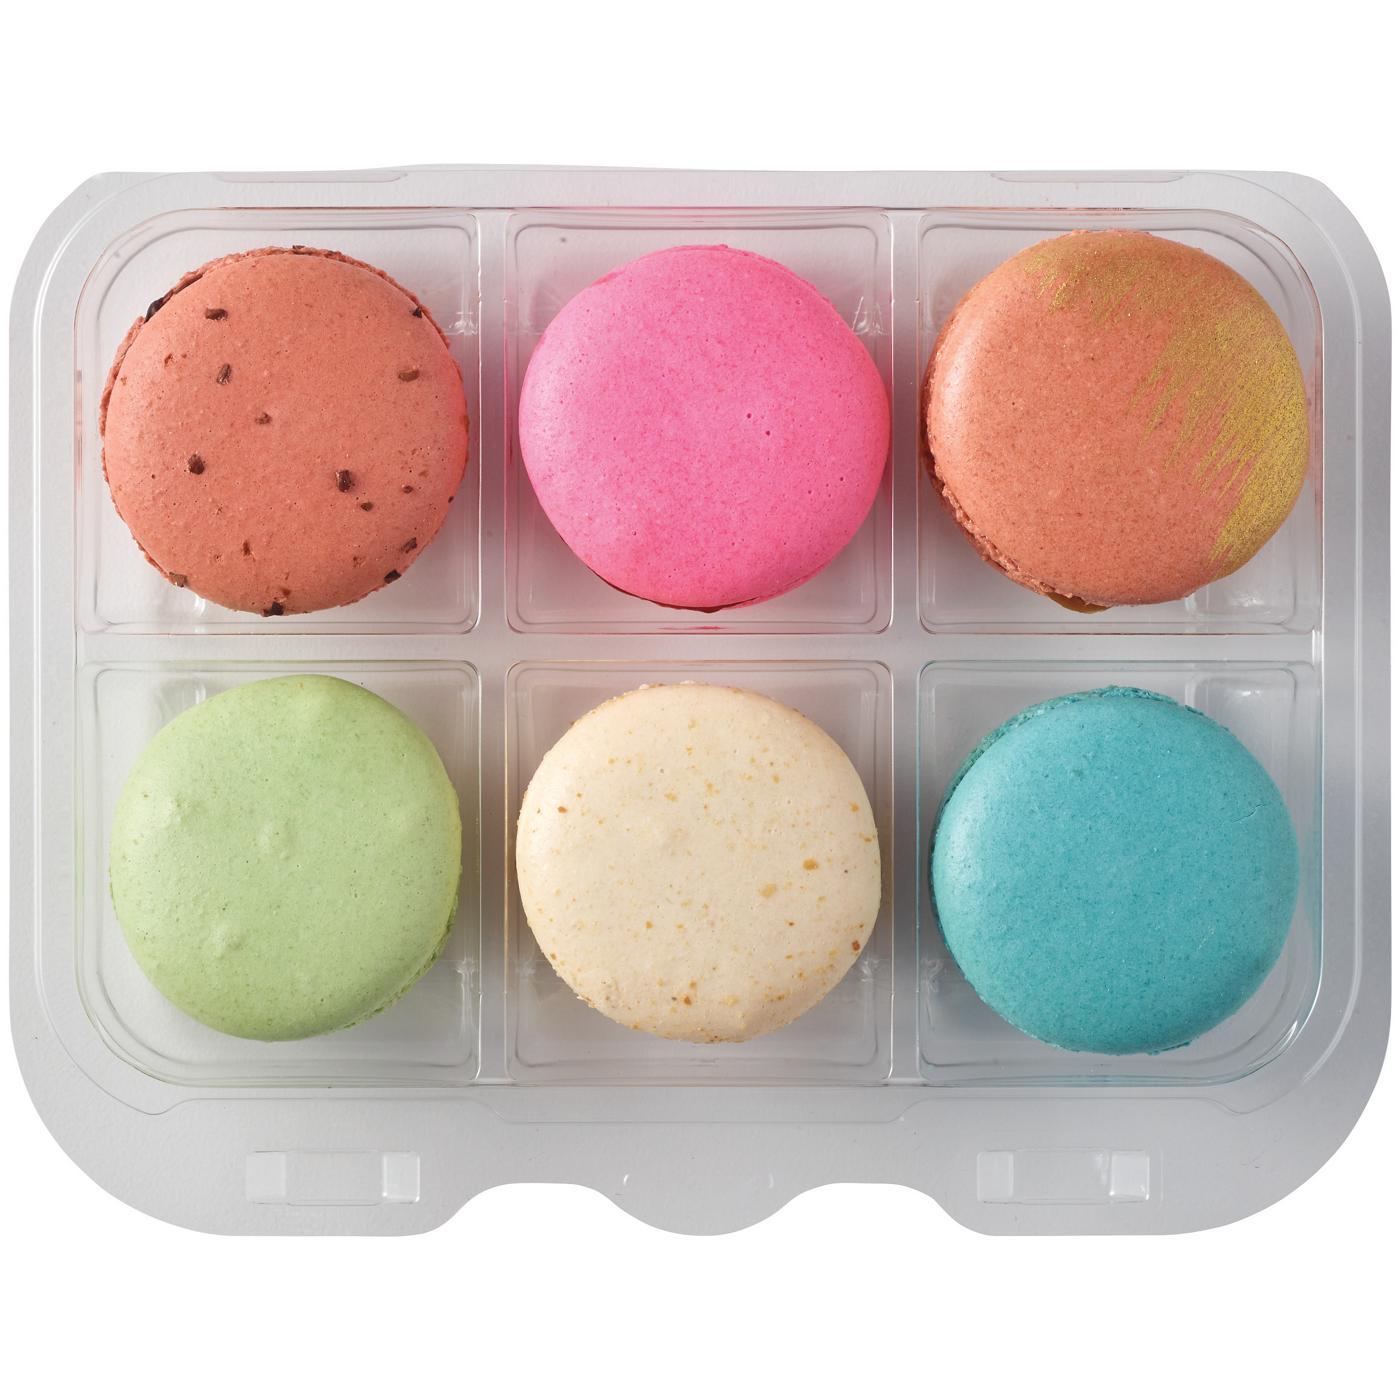 H-E-B Bakery Macaron Cookies Variety Pack; image 1 of 3